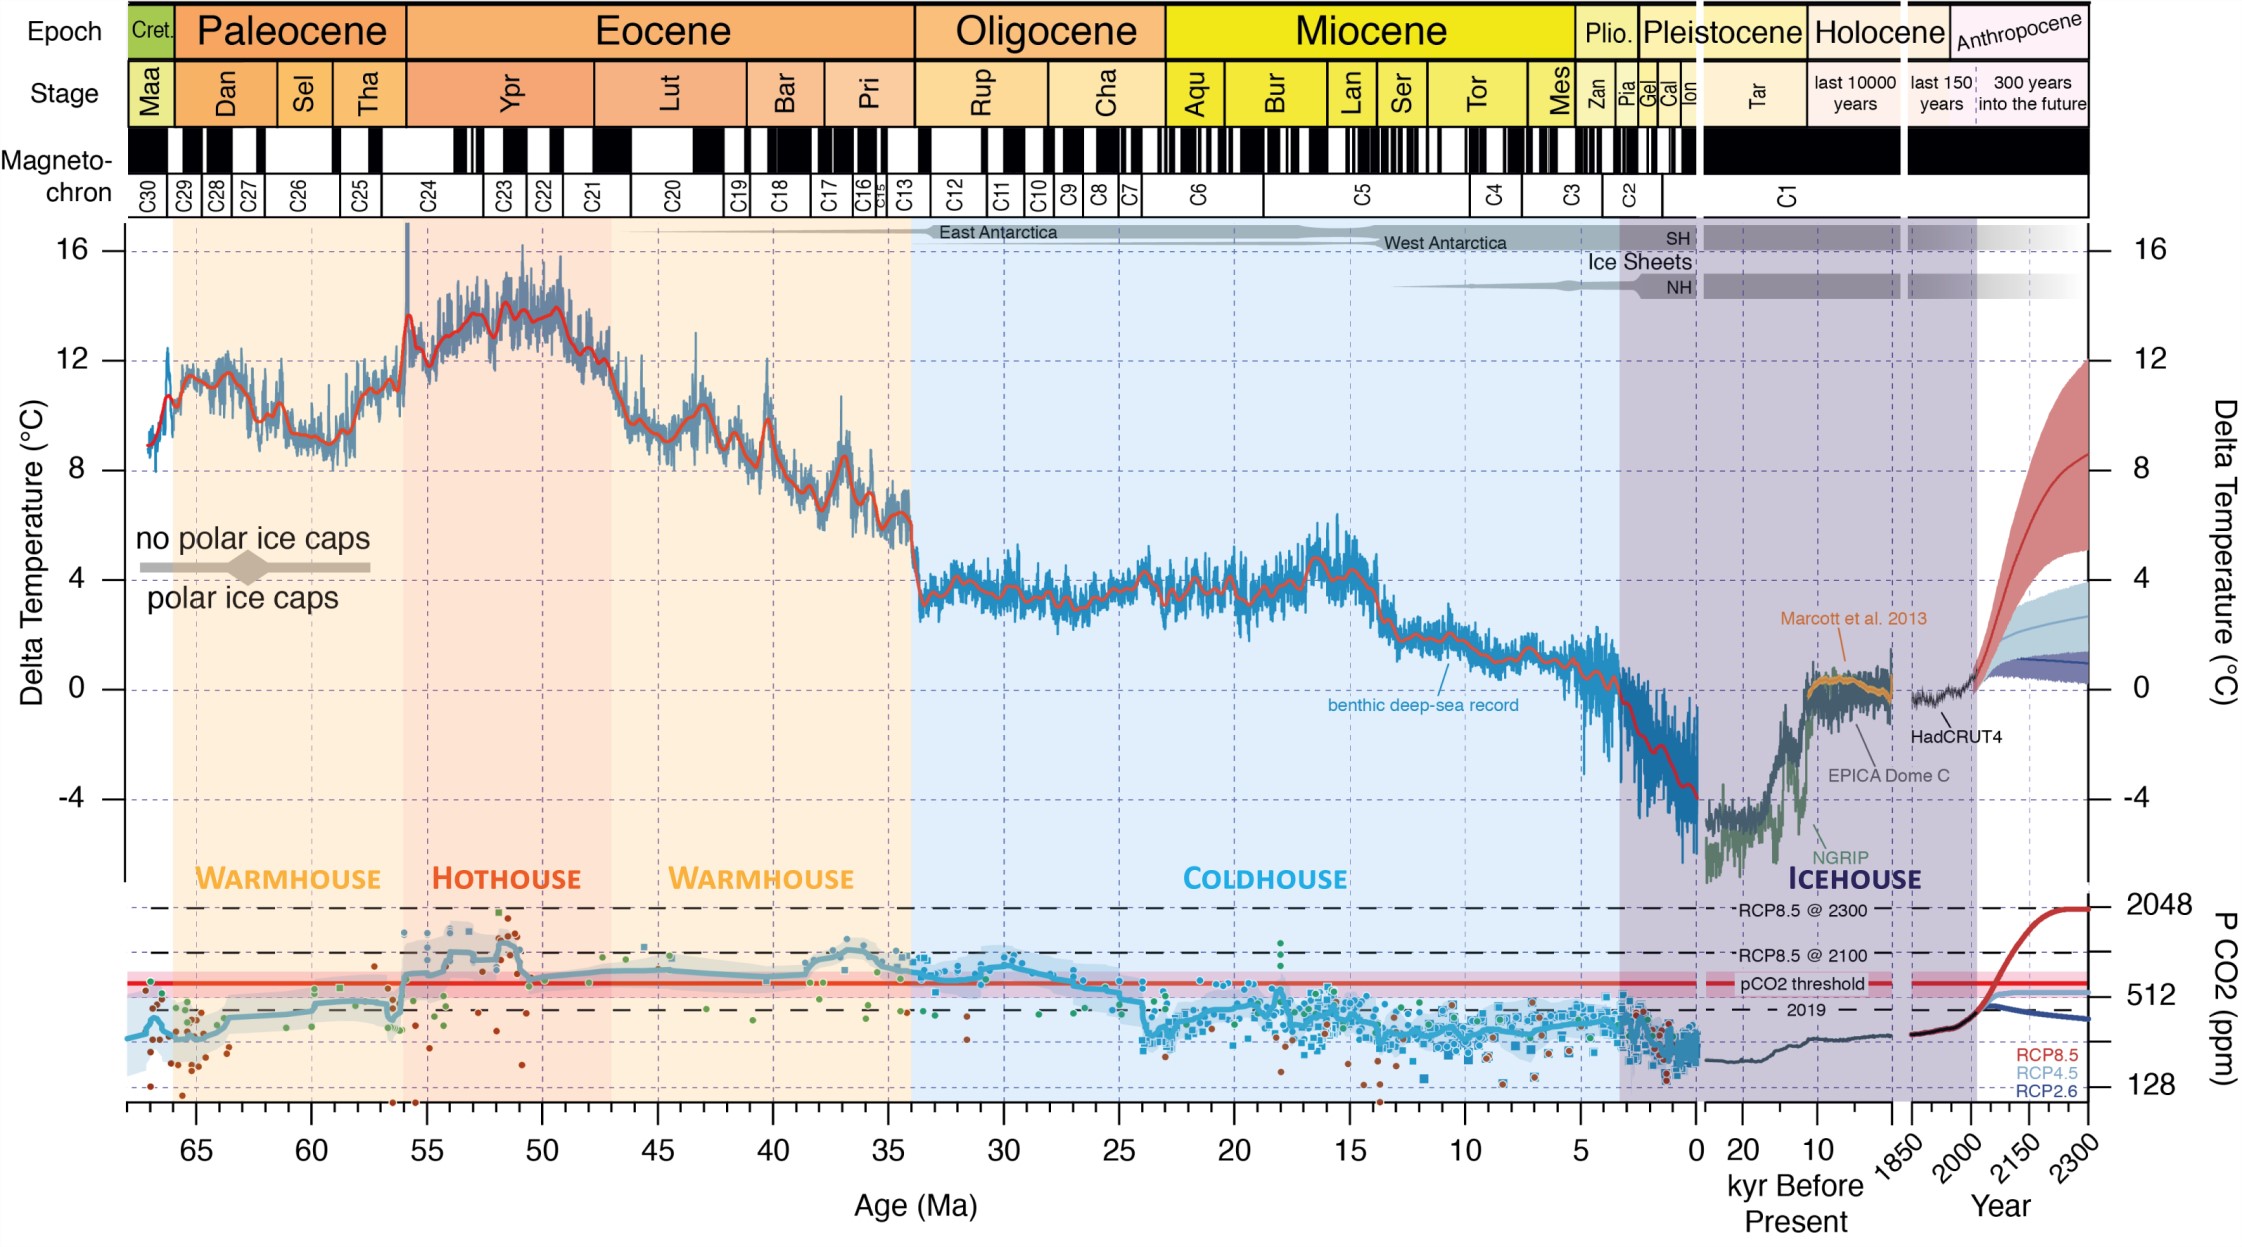 Cenozoic climate evolution and futures projections of global temperature and CO2 content from the GIEC (Westerhold et al., 2020). The red box shows the period during which the Limagnes basins were active and corresponds to the studied interval.